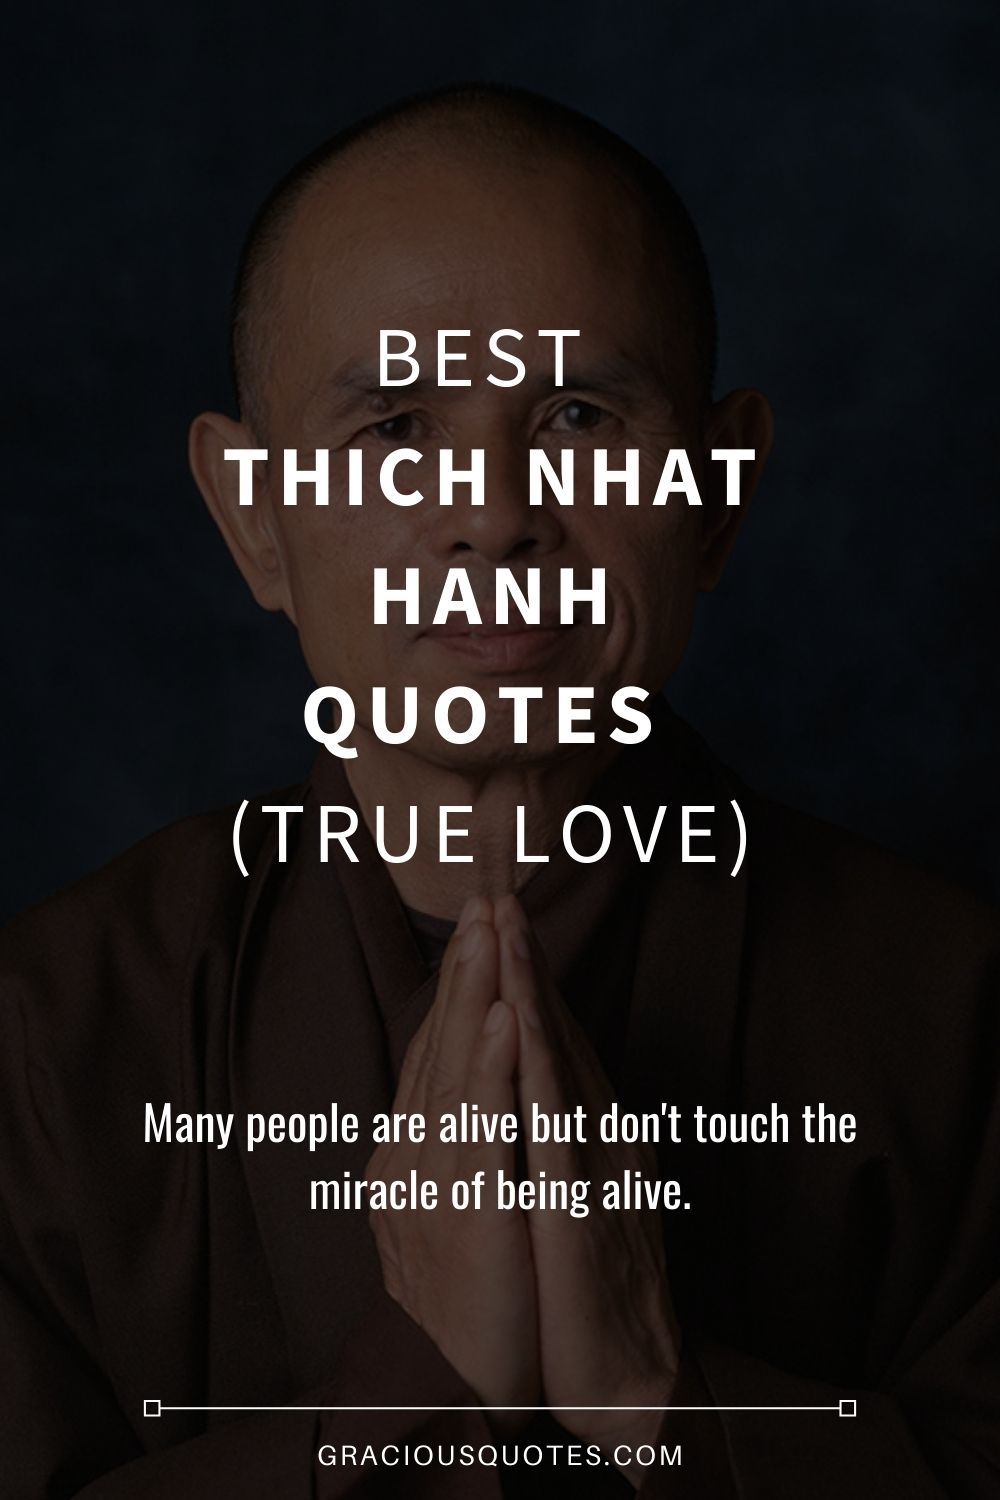 Best Thich Nhat Hanh Quotes (TRUE LOVE) - Gracious Quotes